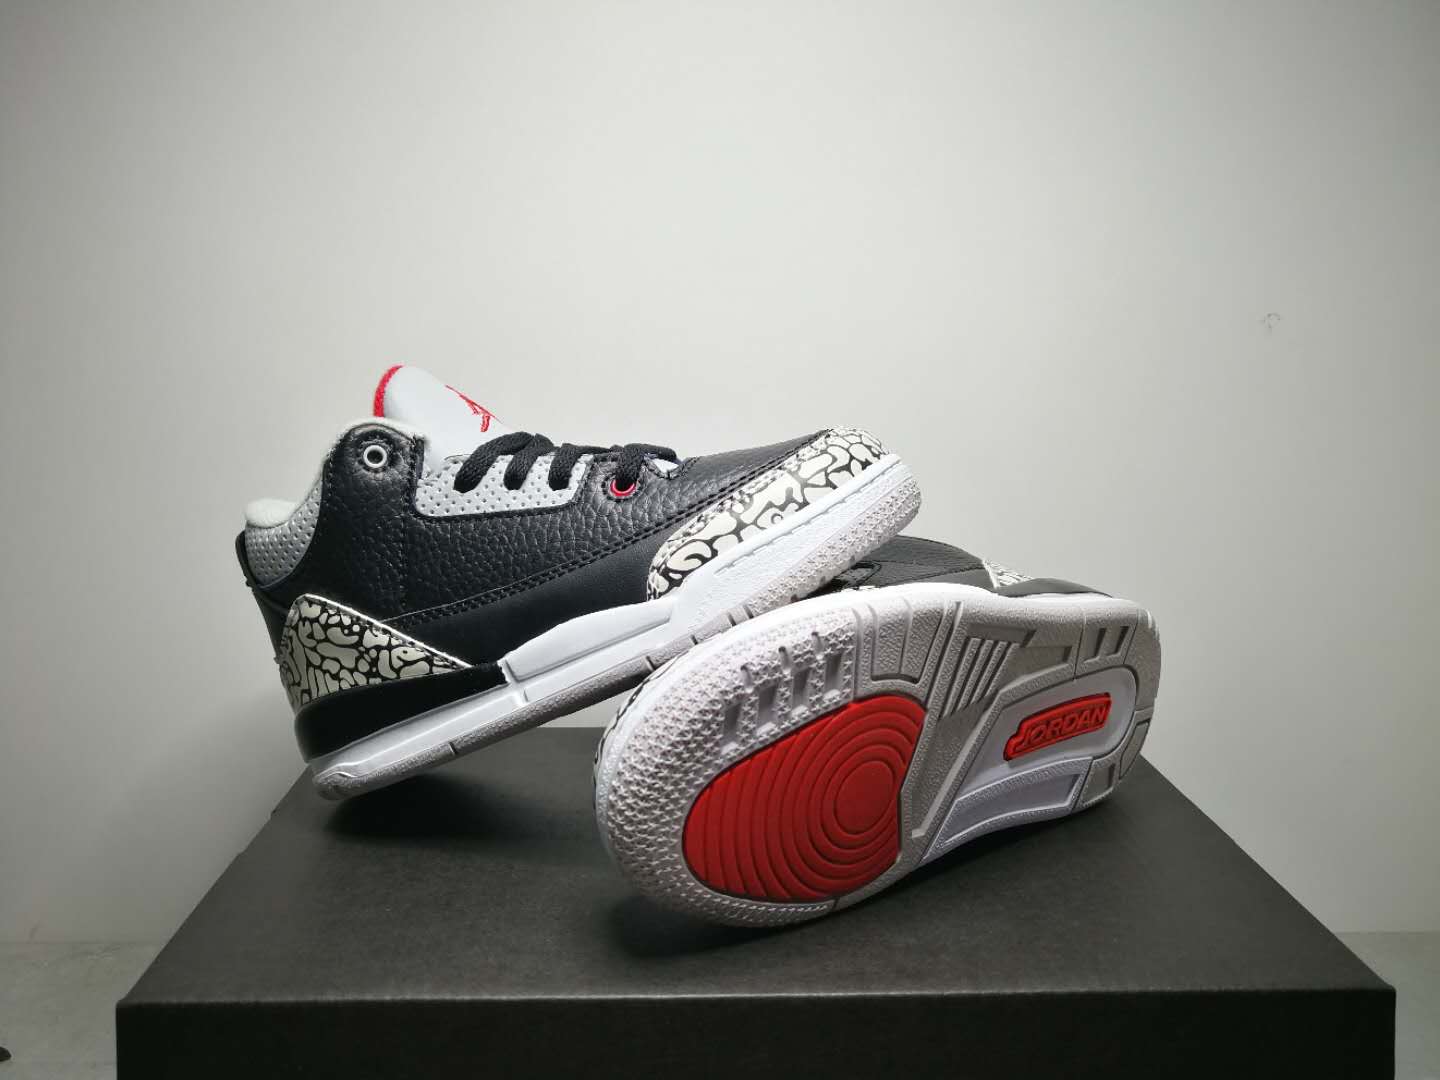 Youth Running weapon Super Quality Air Jordan 3 Shoes 004